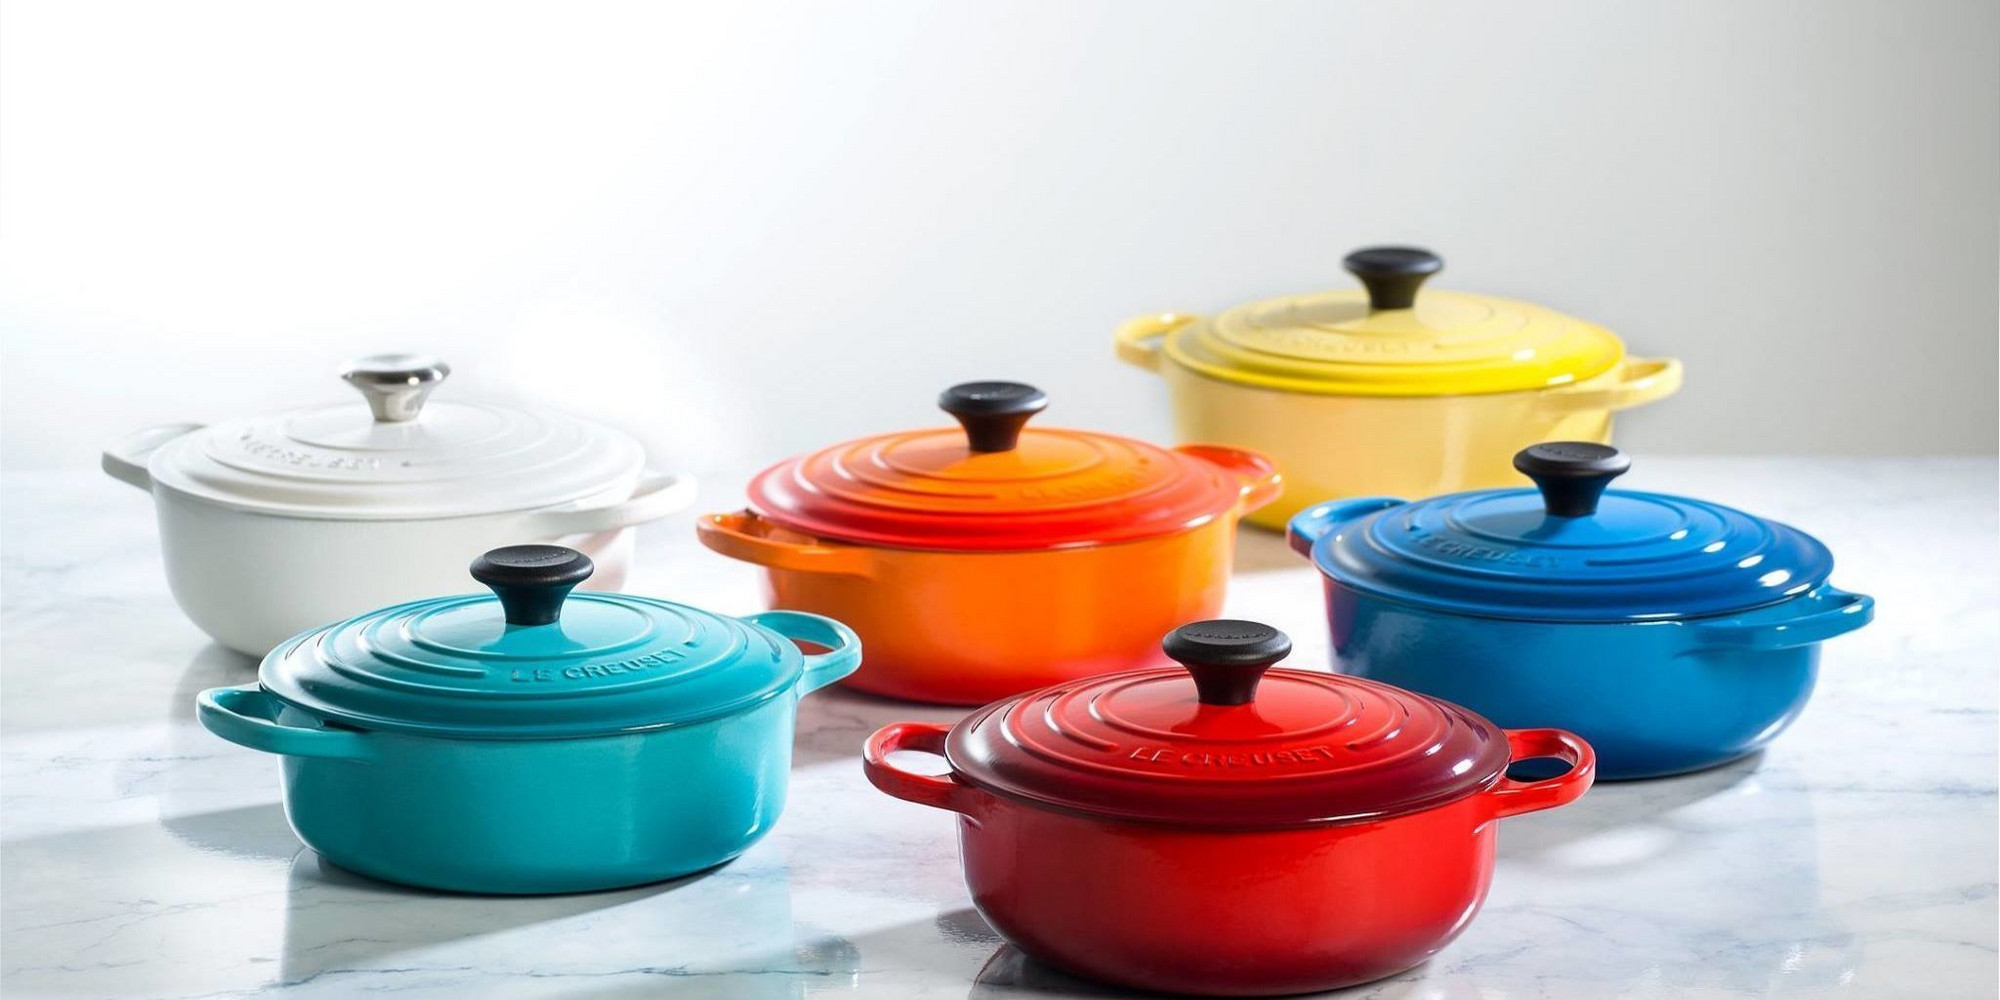 Le Creuset Factory Sale 2017 Deals Charleston Tickets domino